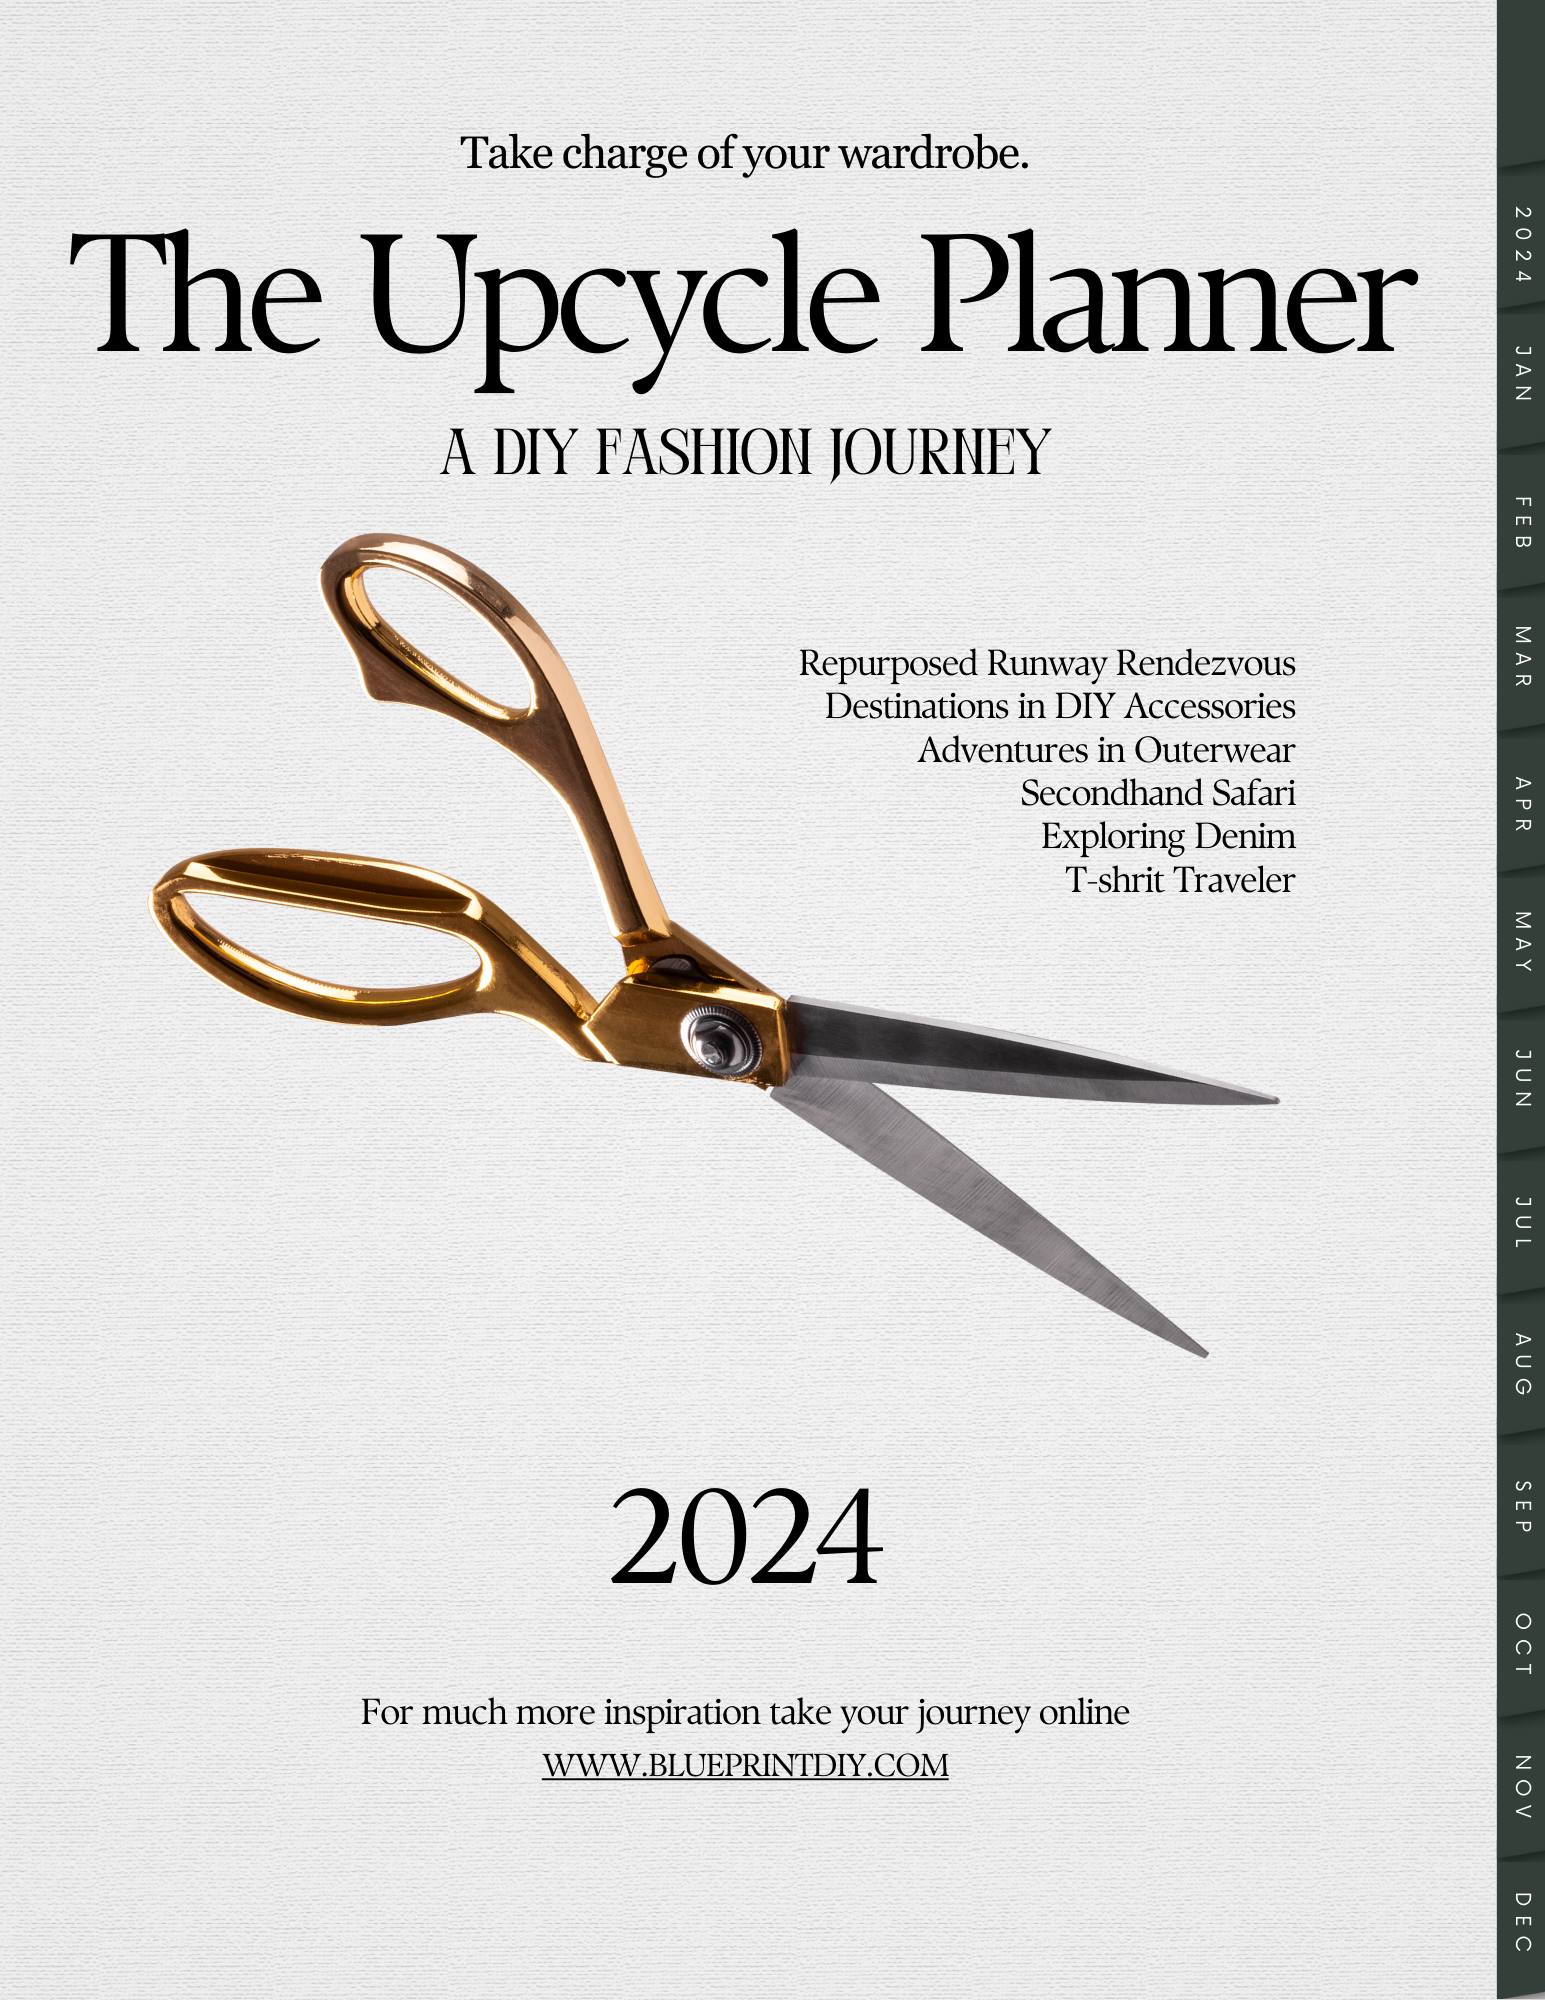 The Upcycle Planner 2024 - Digital